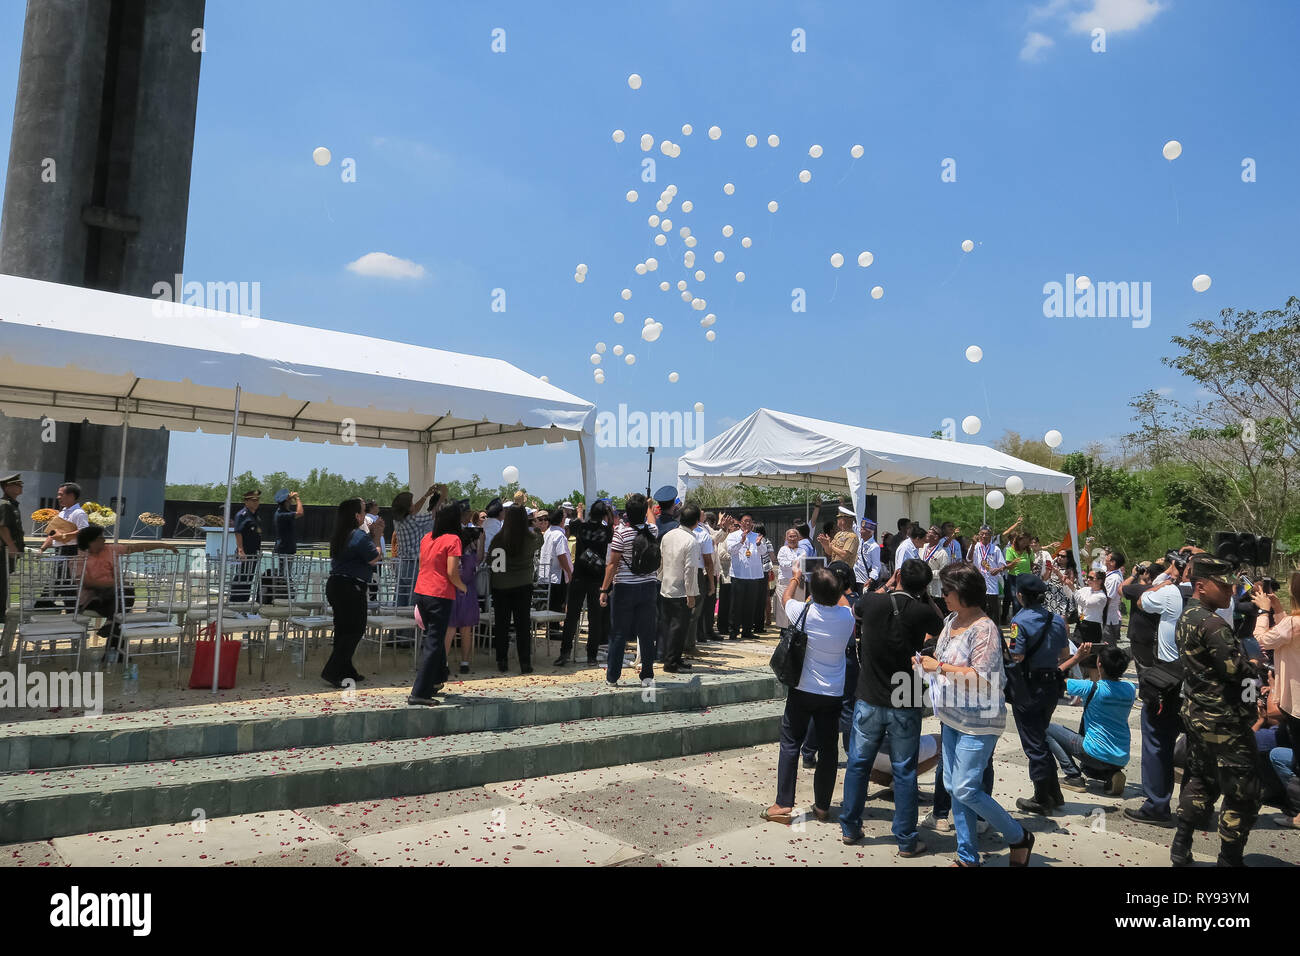 Balloon release over crowd at 74th Bataan Day Anniversary Event - Capas Shrine, Tarlac, Philippines Stock Photo